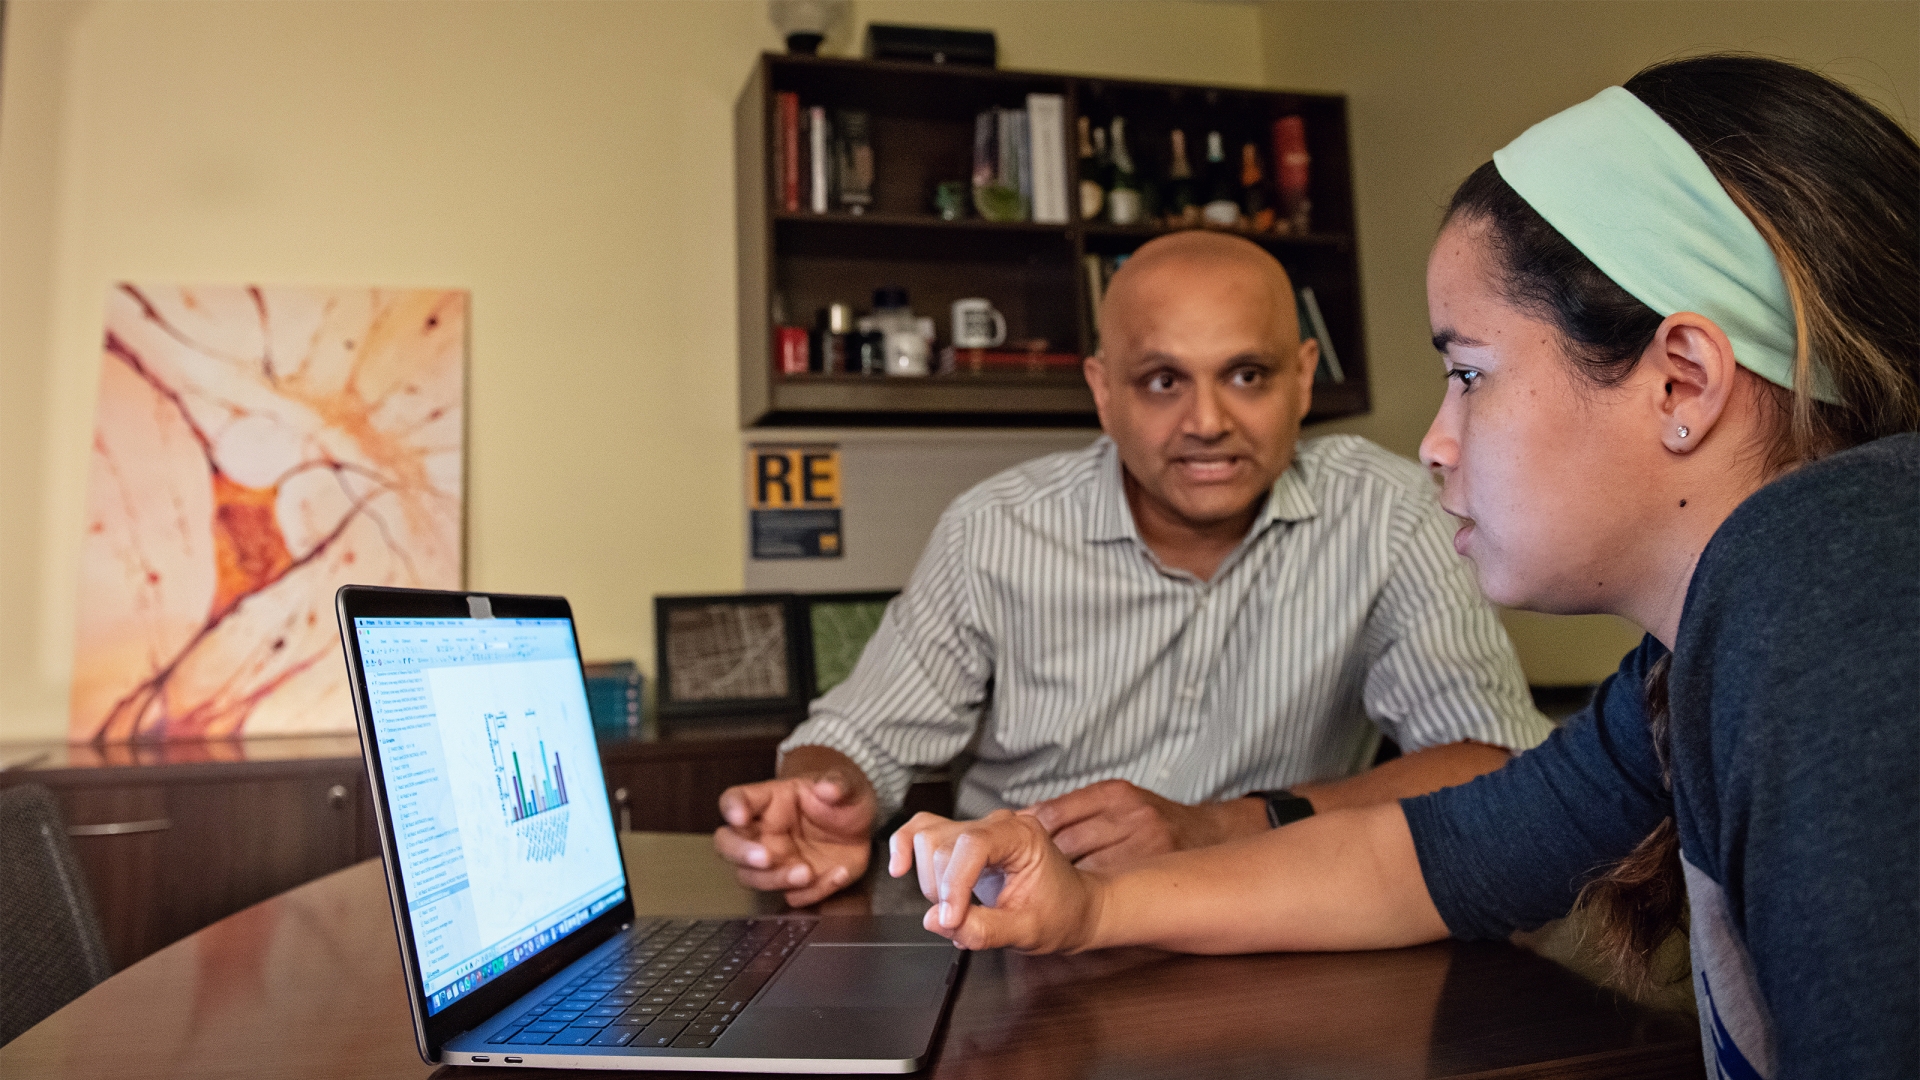 Brown-skinned man and female student in front of laptop showing a graph